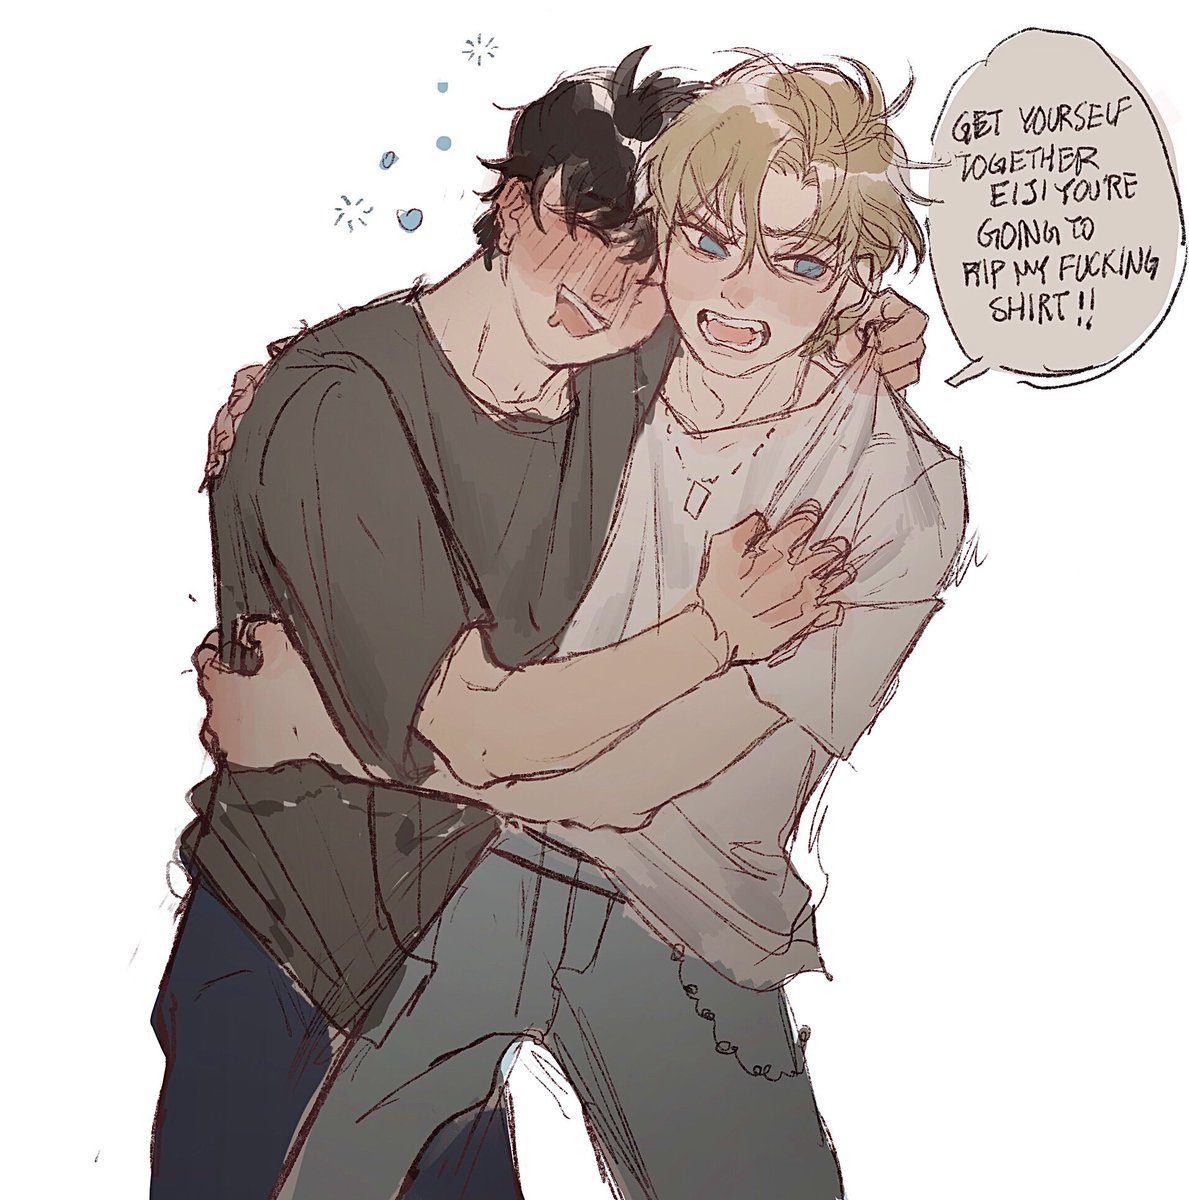 Self indulgent Bananafish art BC I read the entire series again and - .&@(&&(@@)¥¥£~++{+€]>?!\¥¥<£ 
😃aha
(College post frat party AU) 